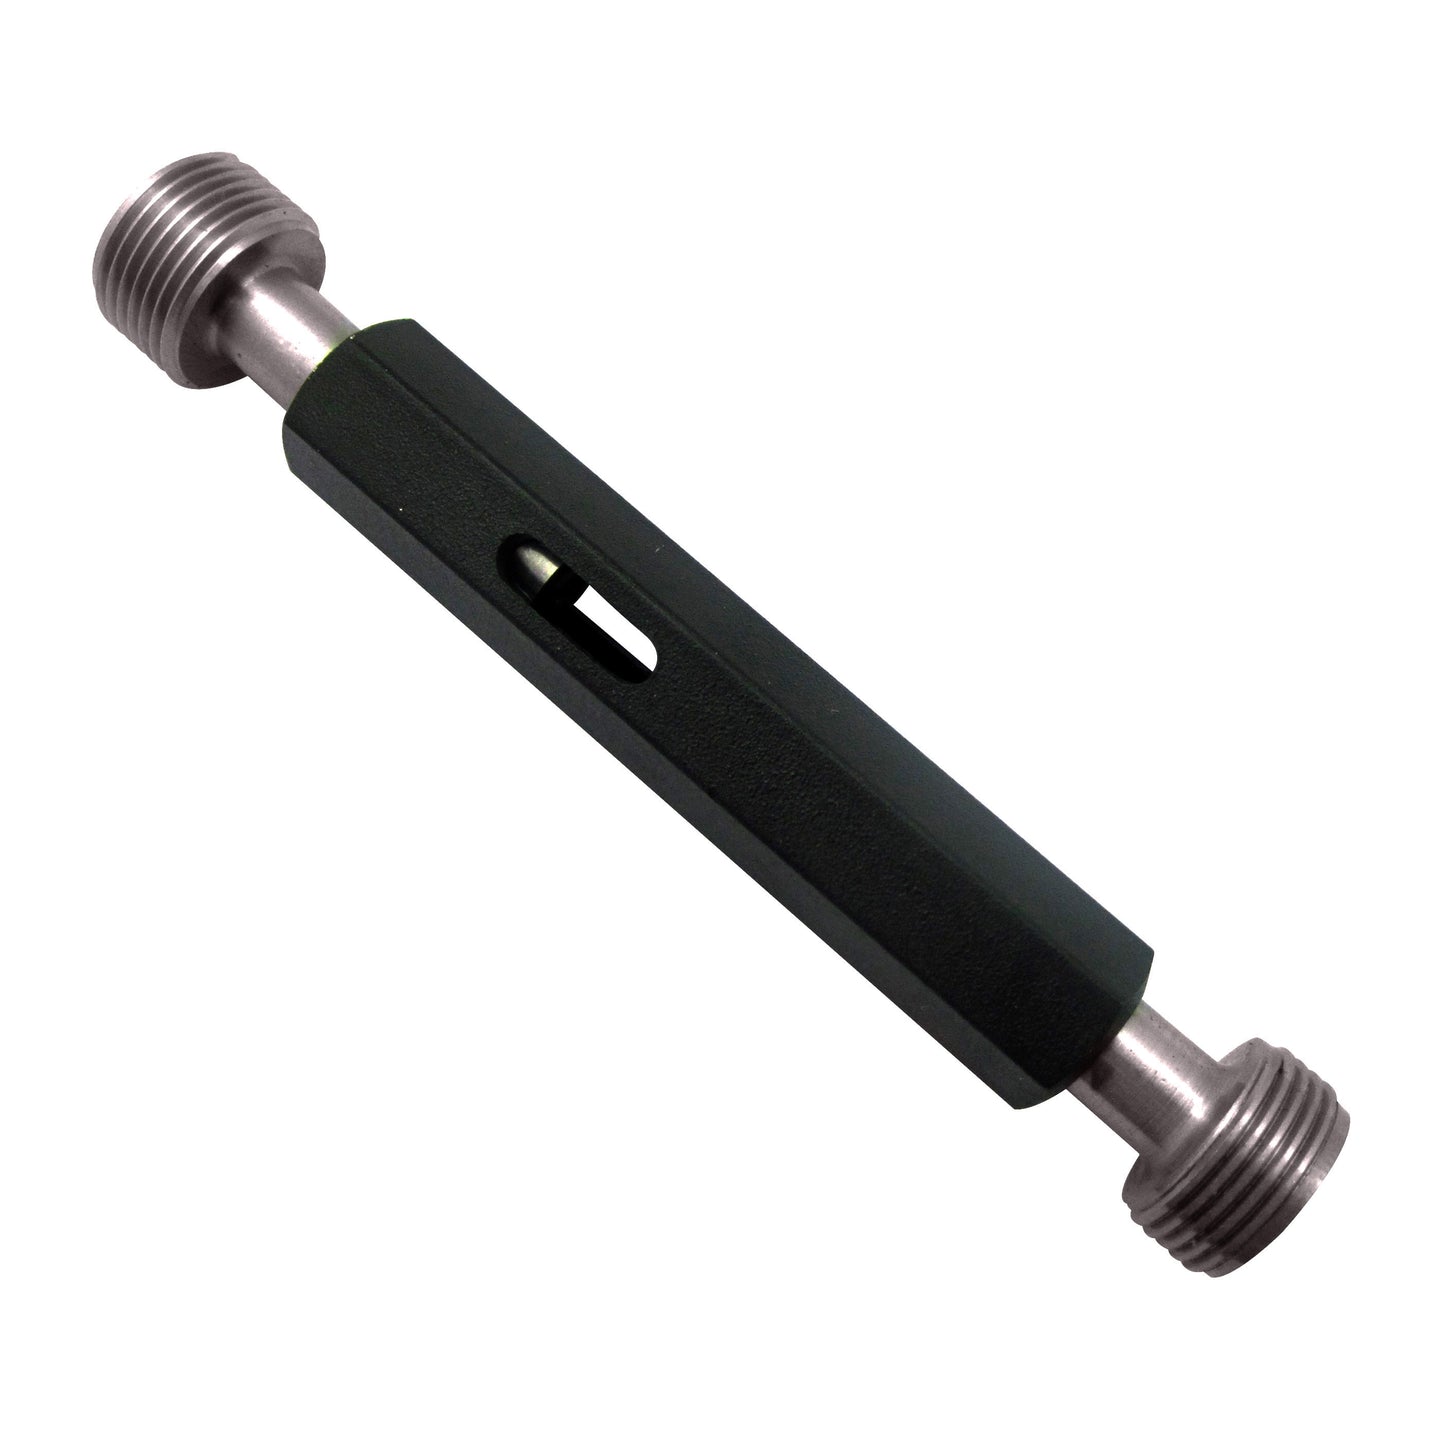 7/8" - 10 Unified Right Hand Thread Plug Gauge